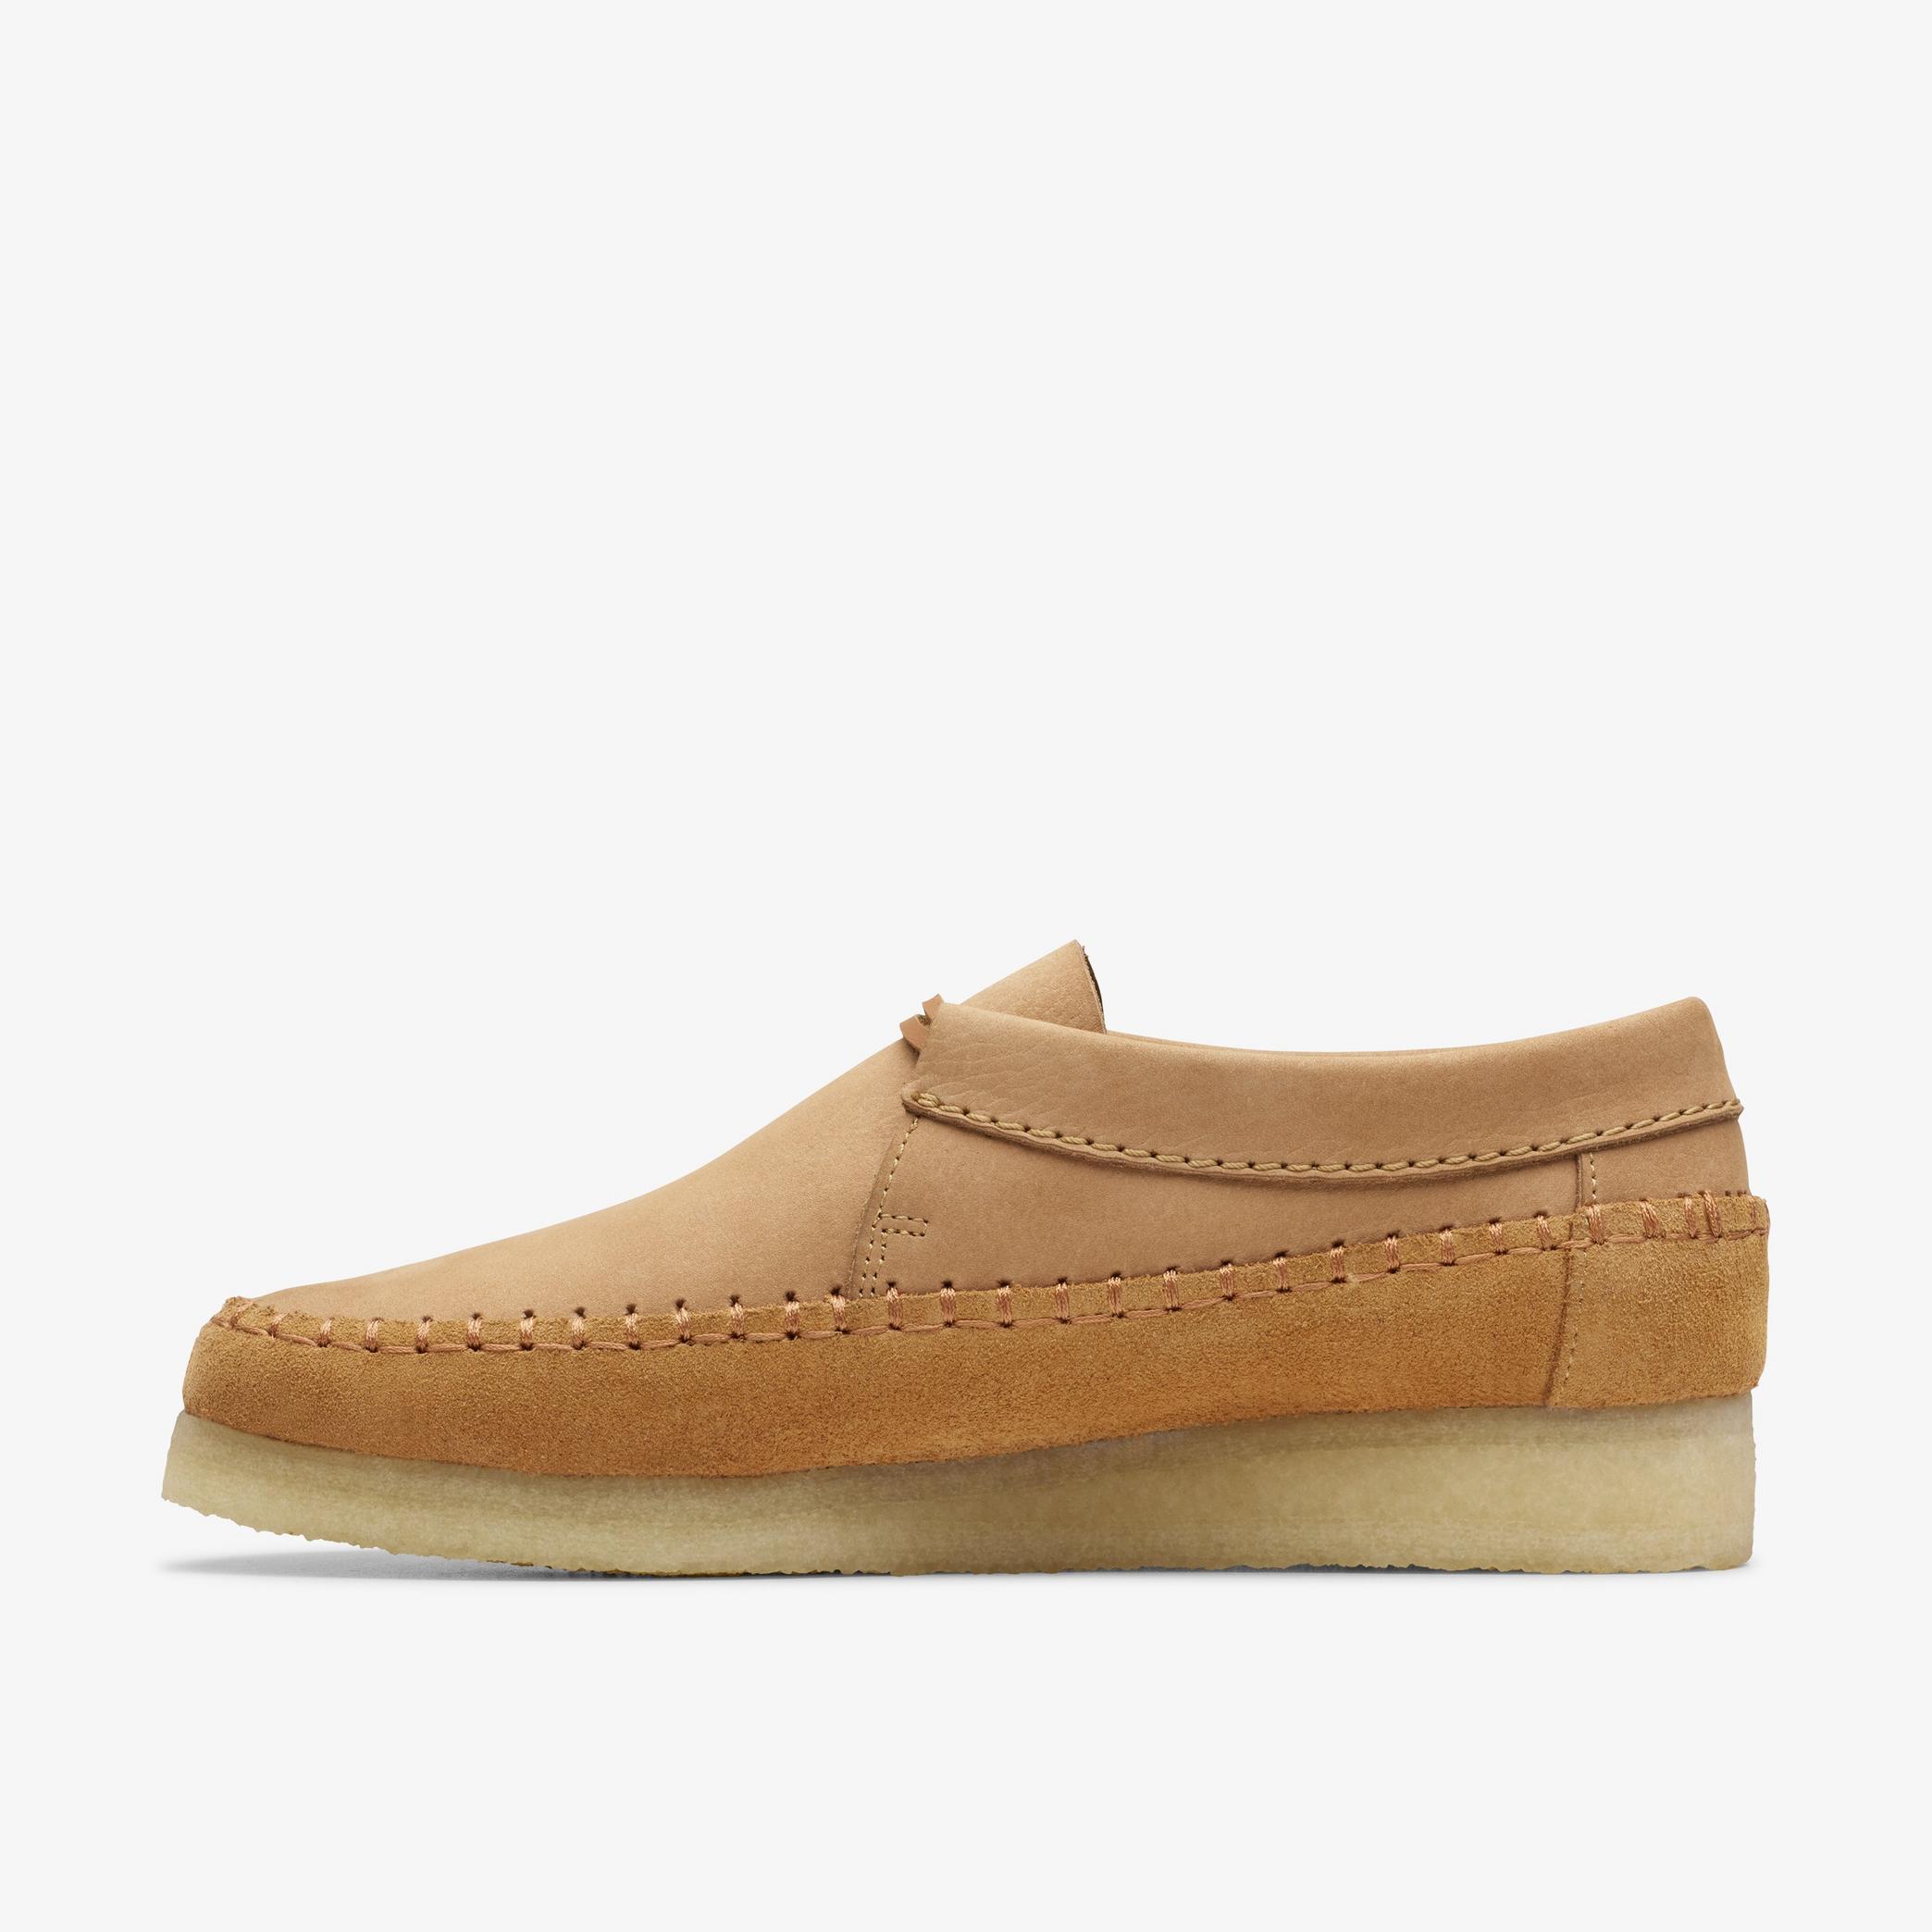 Weaver Tie Tan Suede Moccasins, view 2 of 6